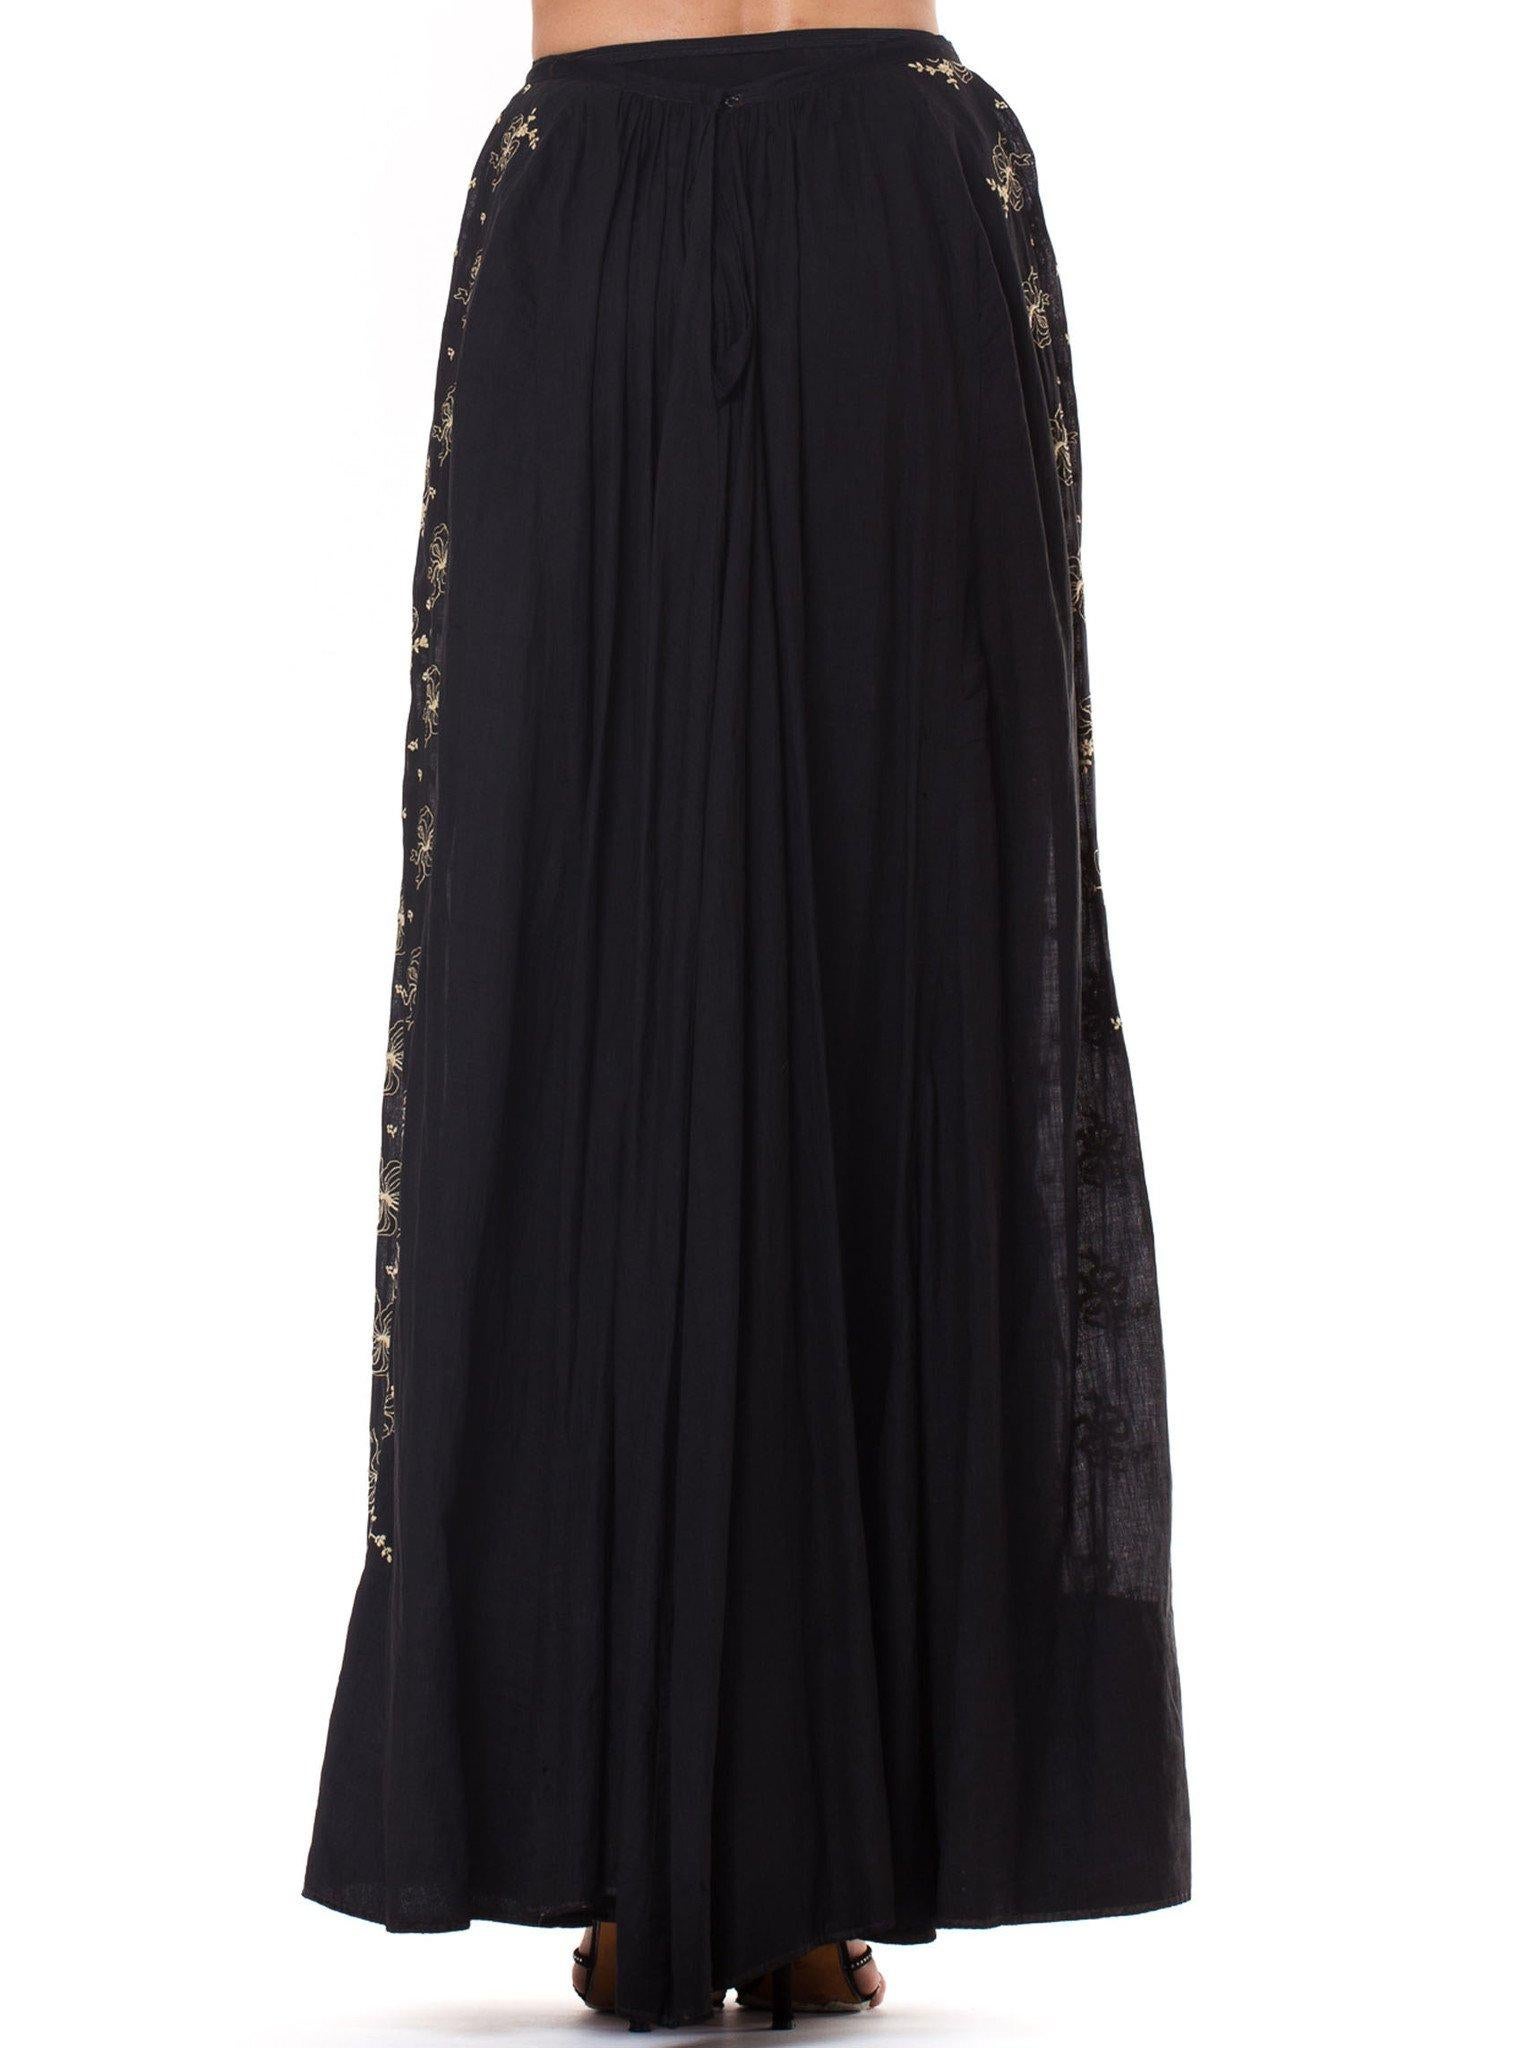 1890S Black Victorian Cotton Sateen Skirt With Lace Style Embroidery ...